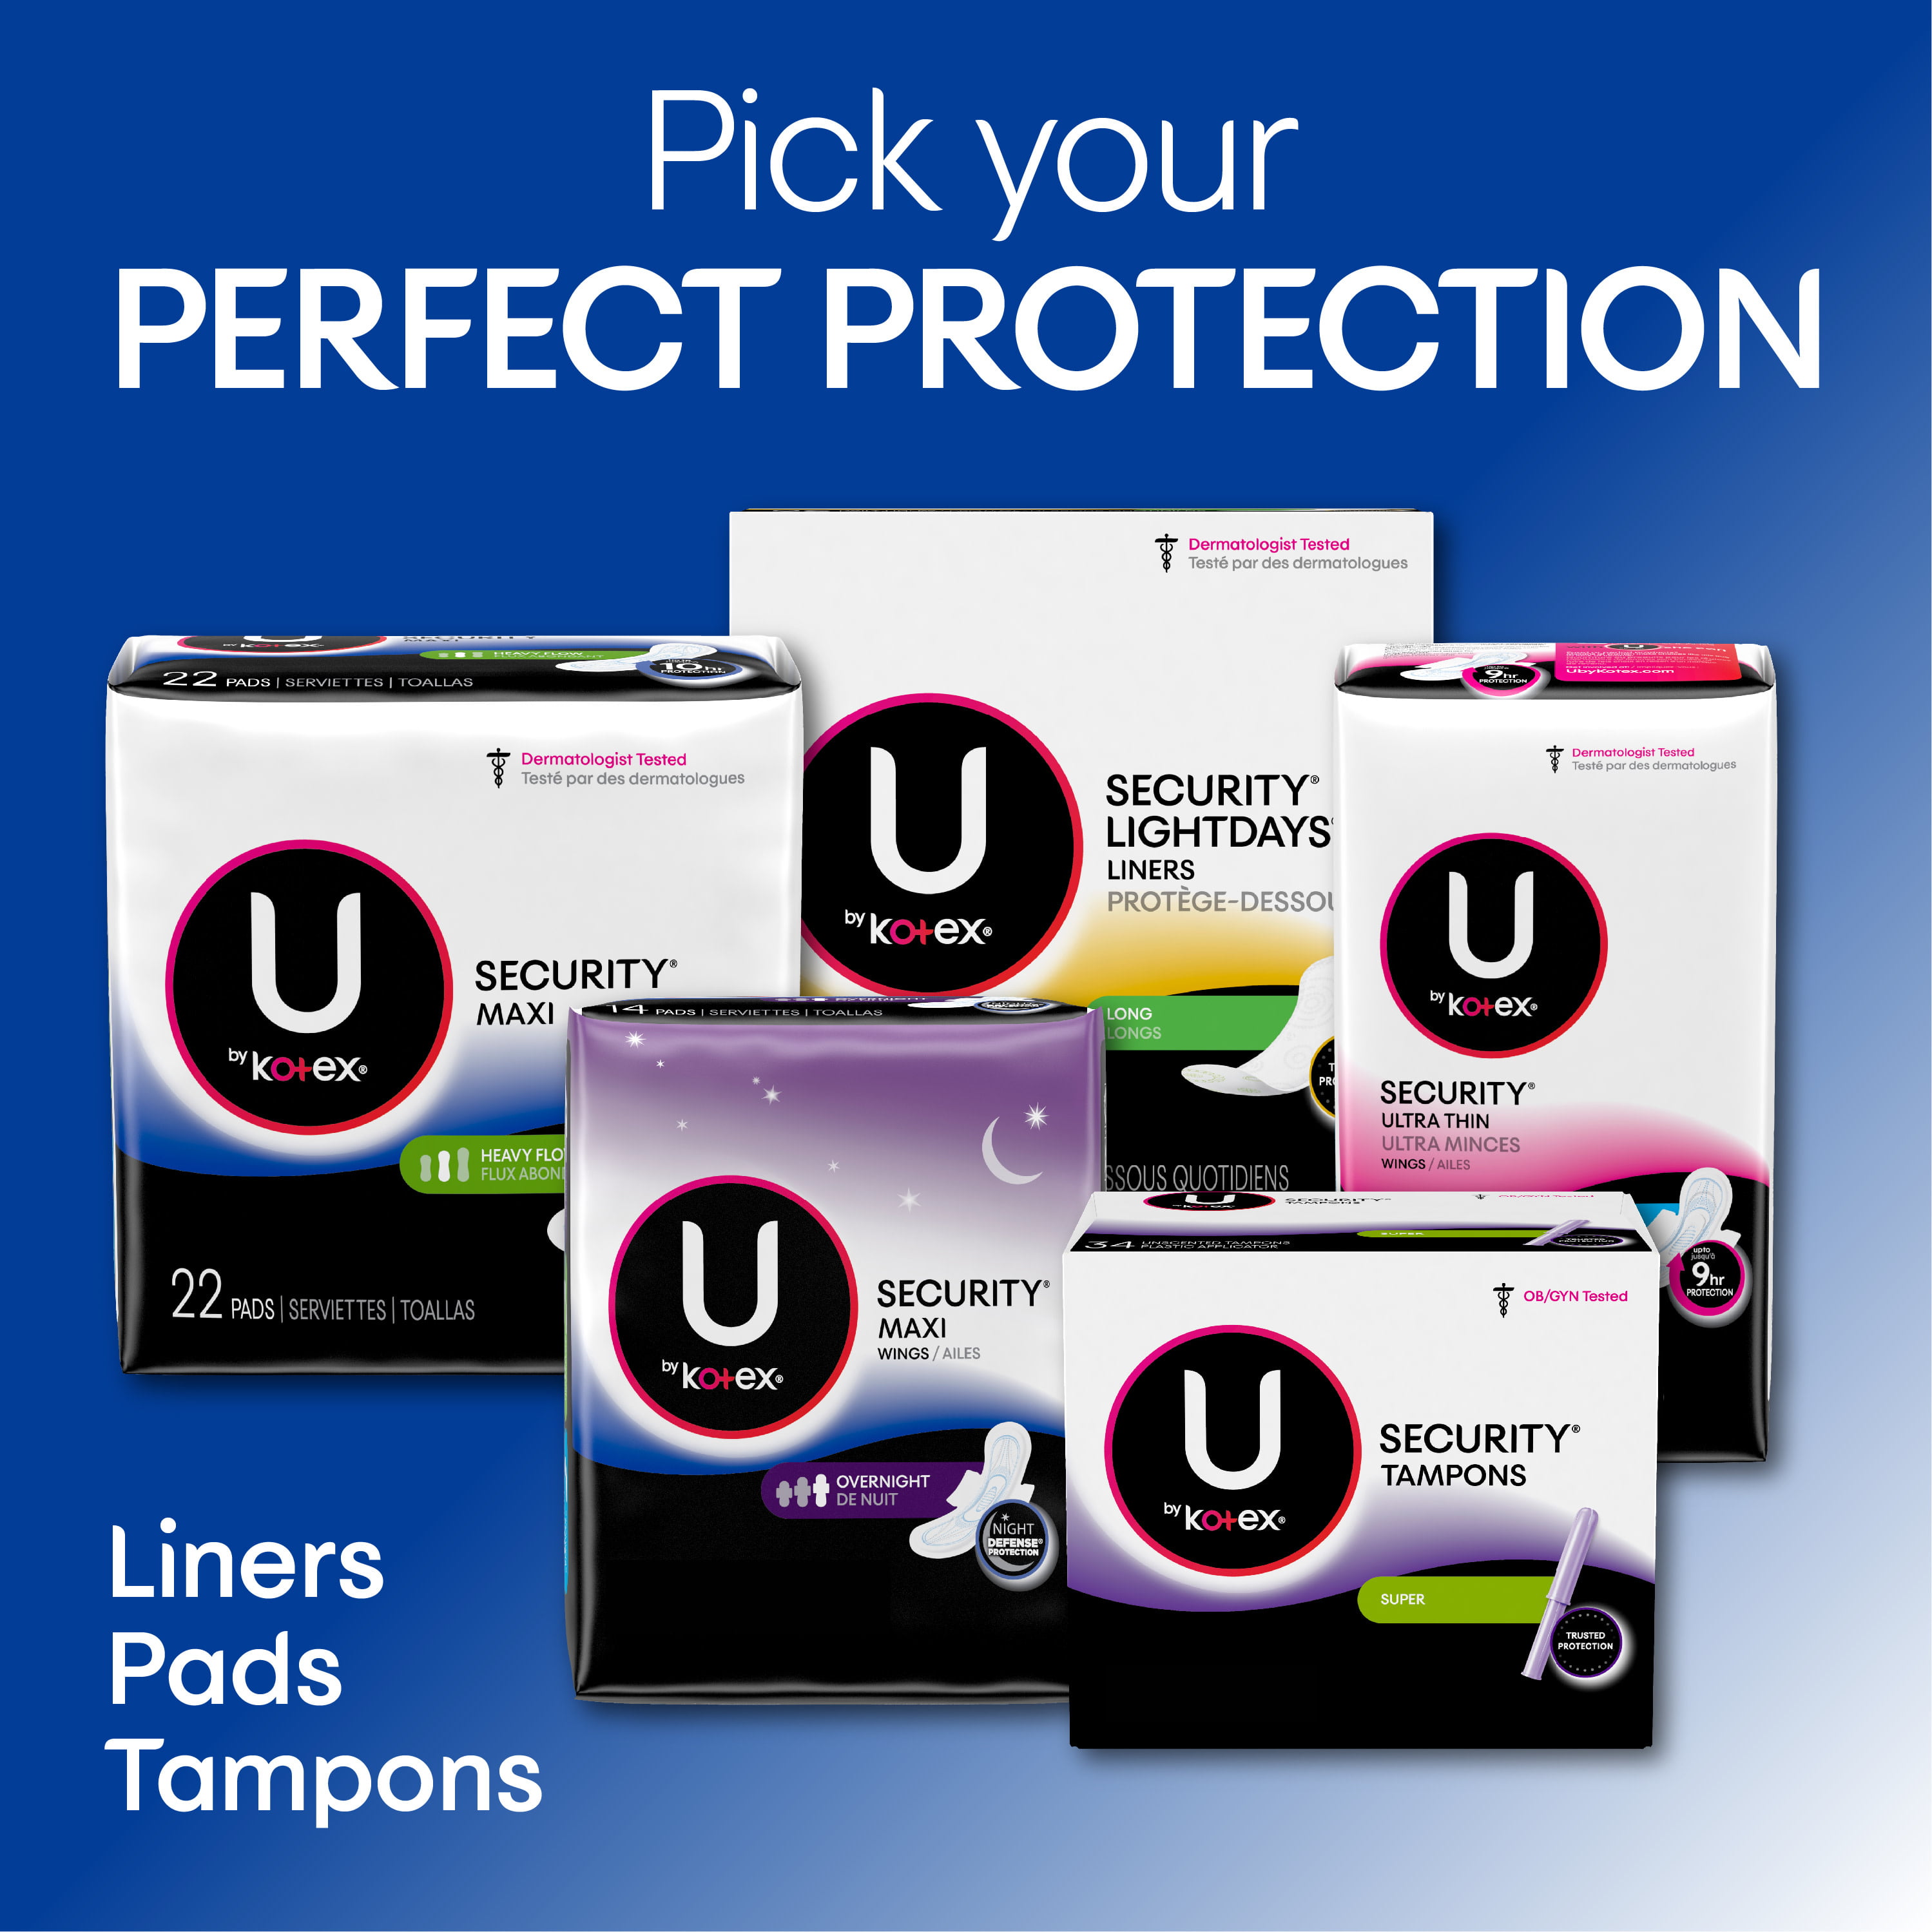 U by Kotex Barely There Regular Thong Liners, 50 ct - QFC